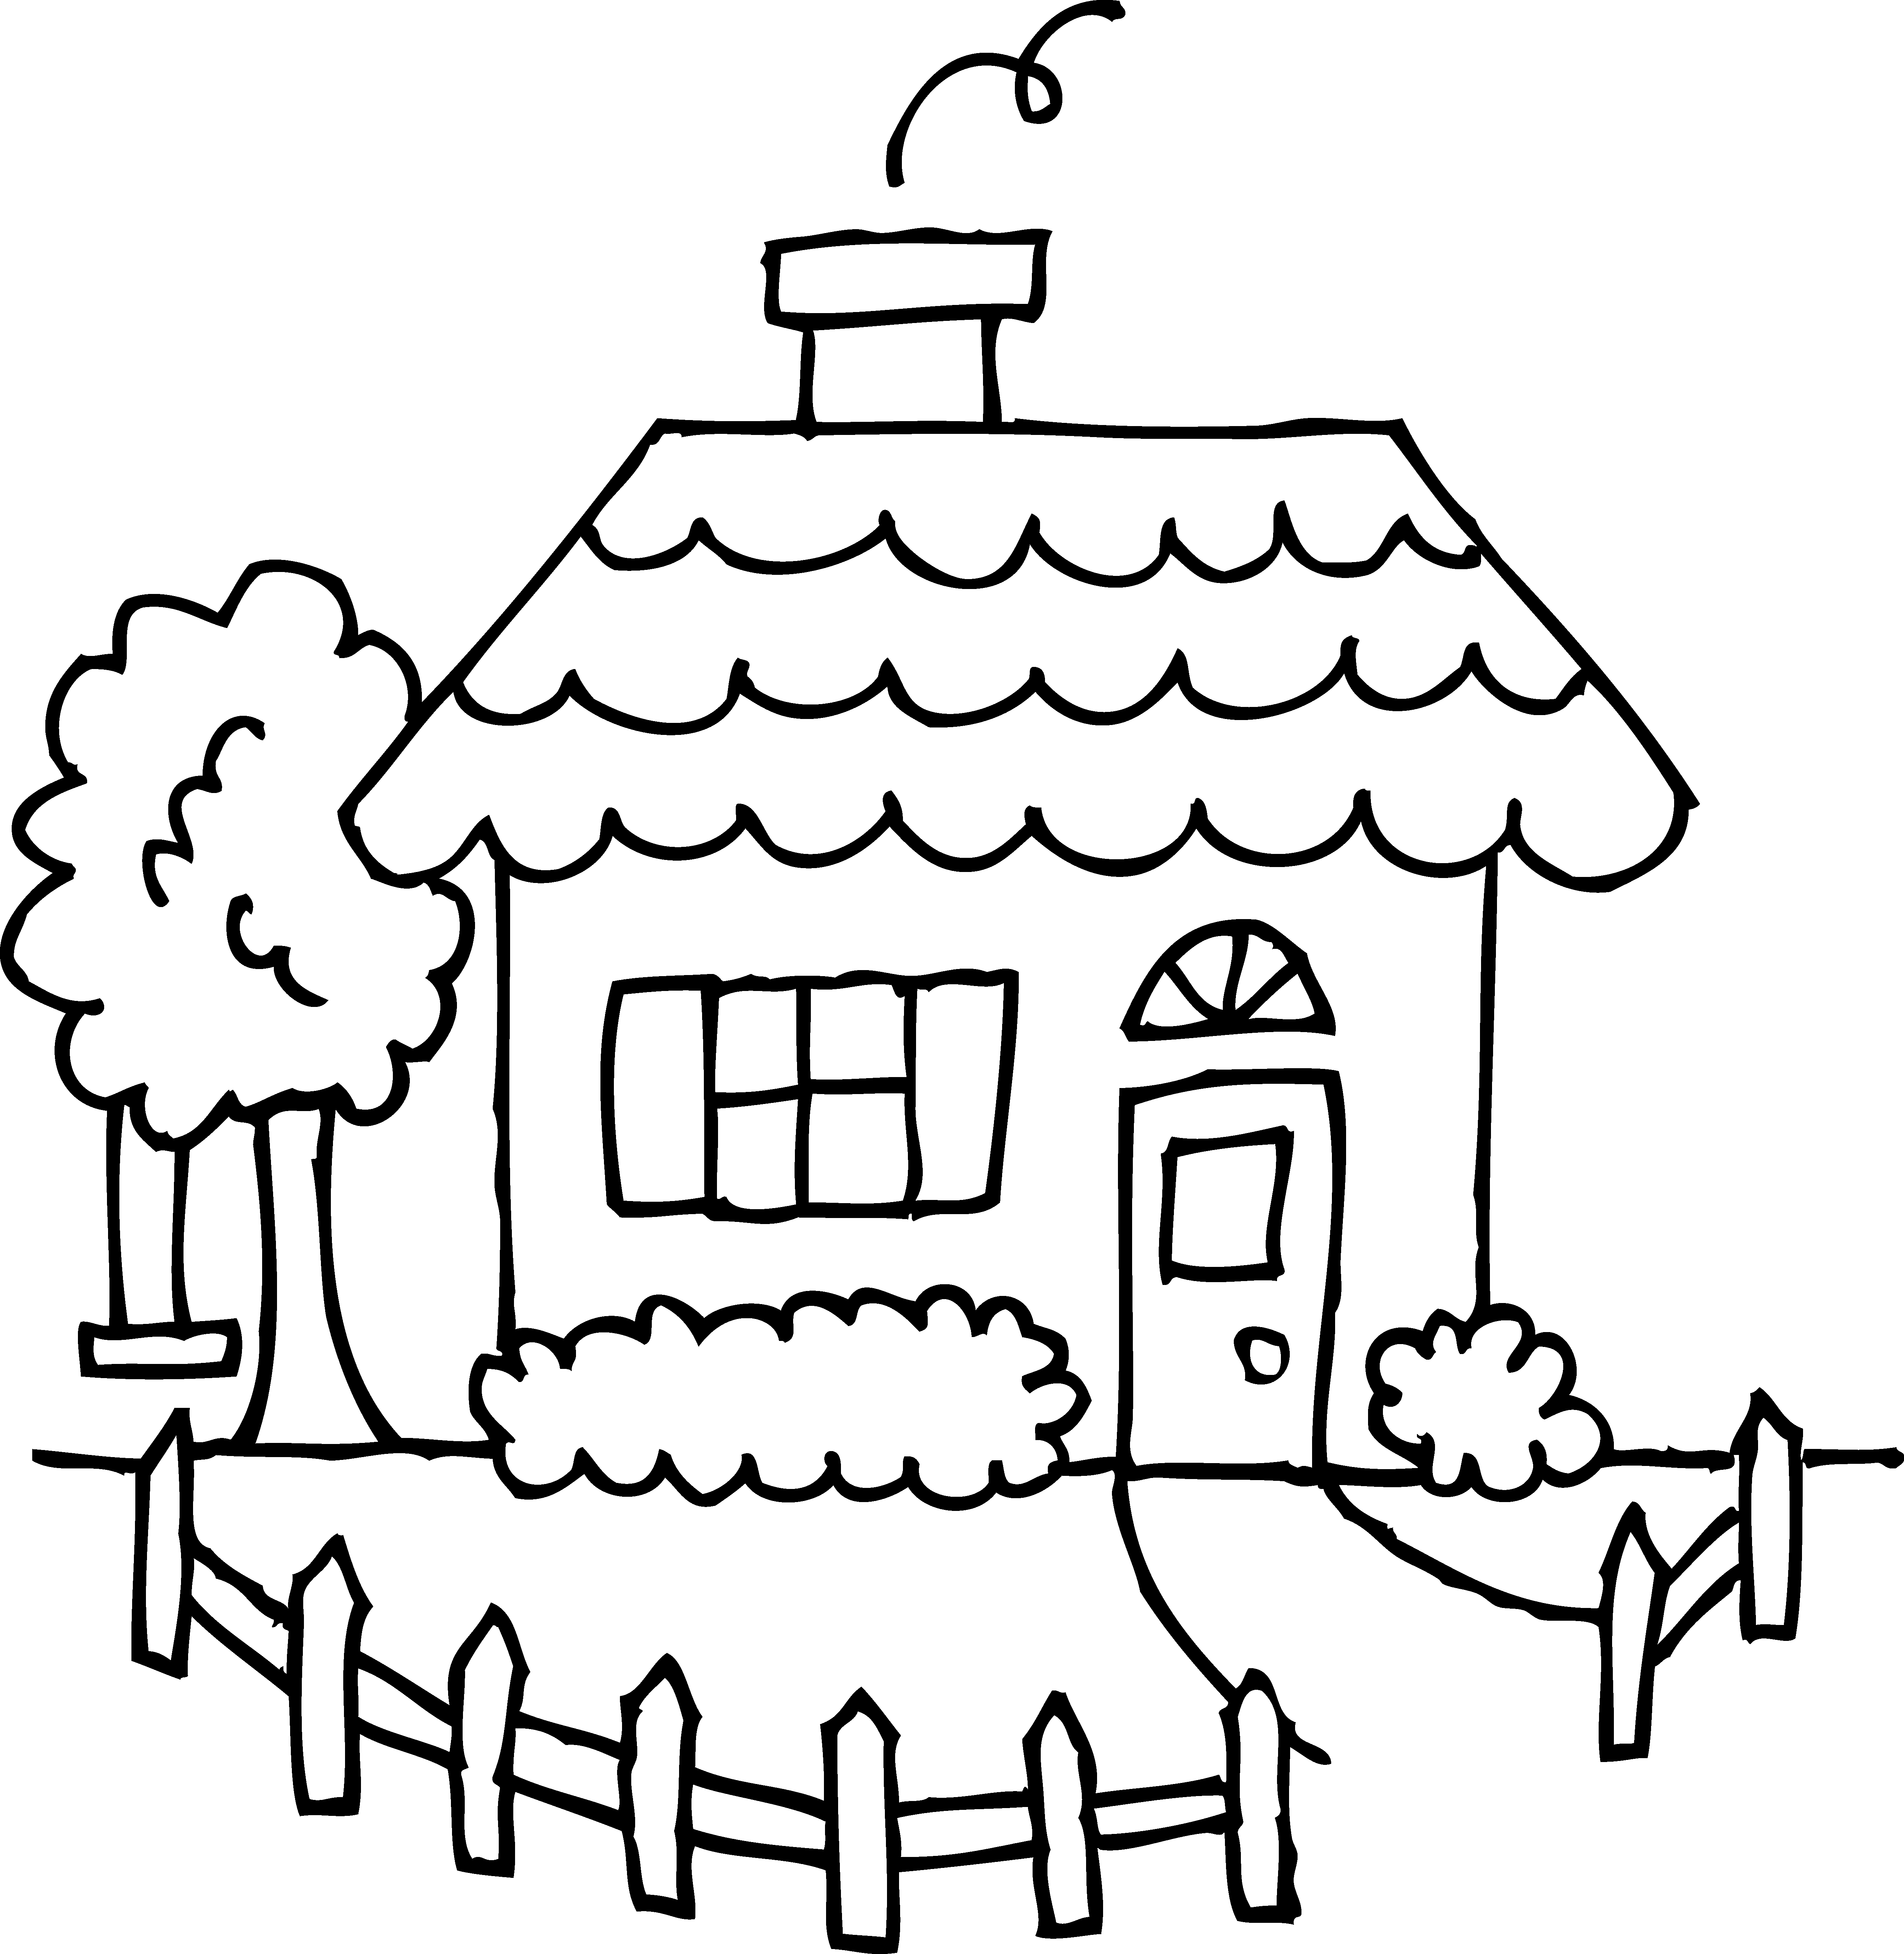 School yard clipart black and white